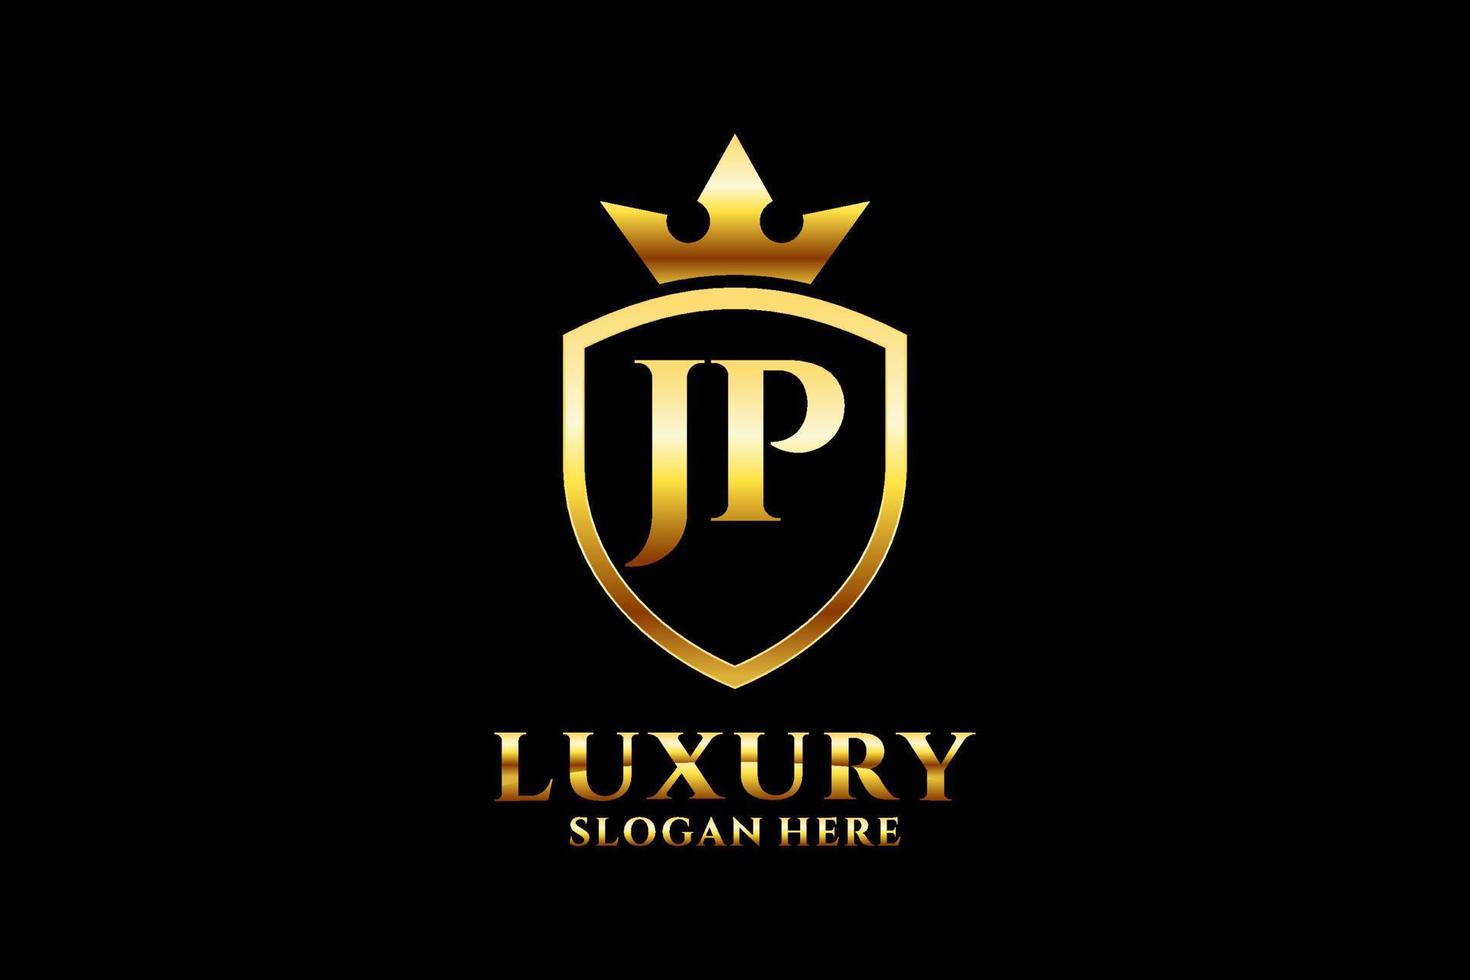 initial JP elegant luxury monogram logo or badge template with scrolls and royal crown - perfect for luxurious branding projects vector